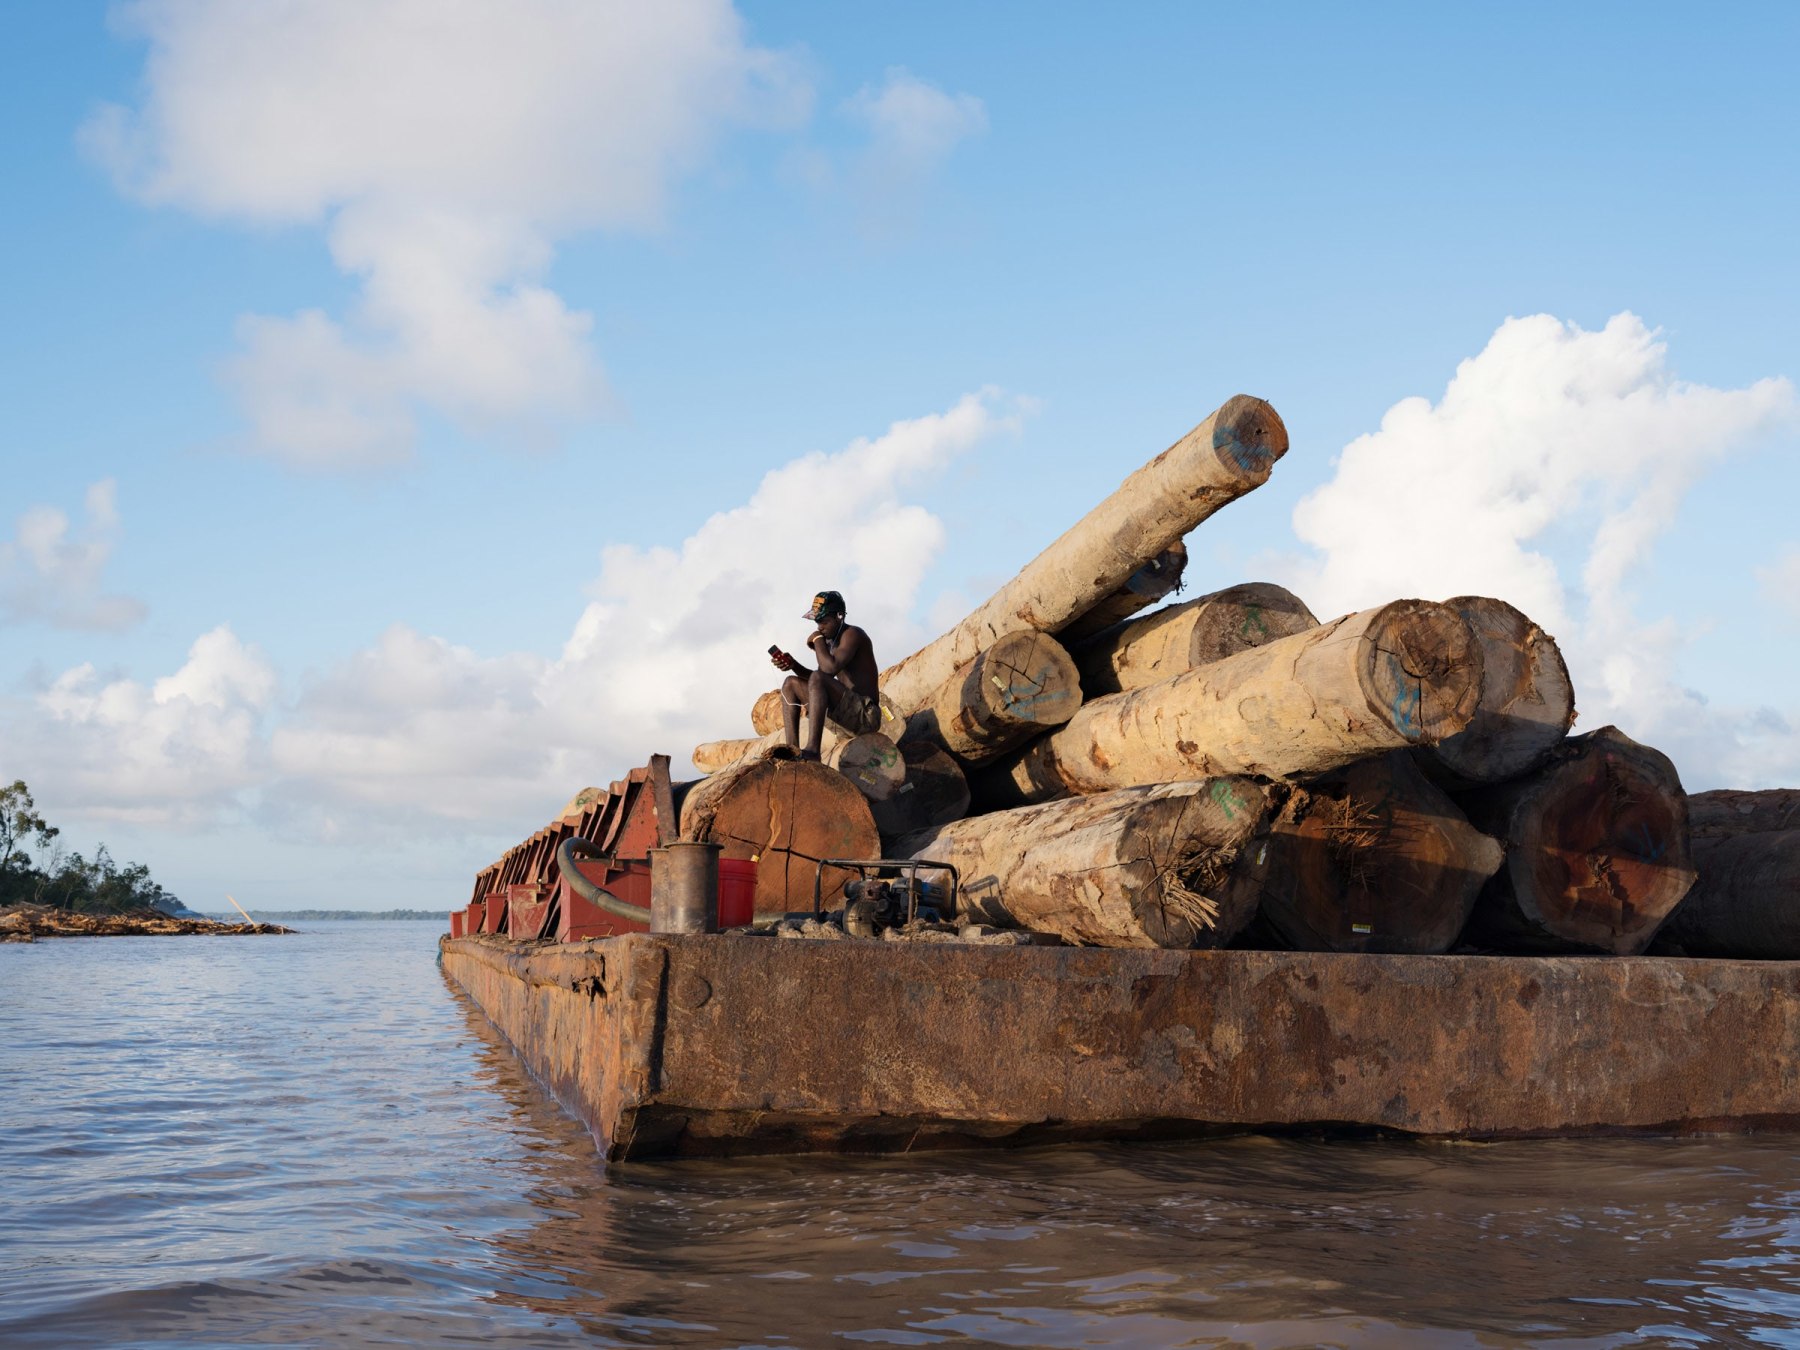 LUCAS FOGLIAKurt Guarding Logs for Export to China, Essequibo River, Guyana, 2016, Pigment Print34 x 44 inchesEdition of 8